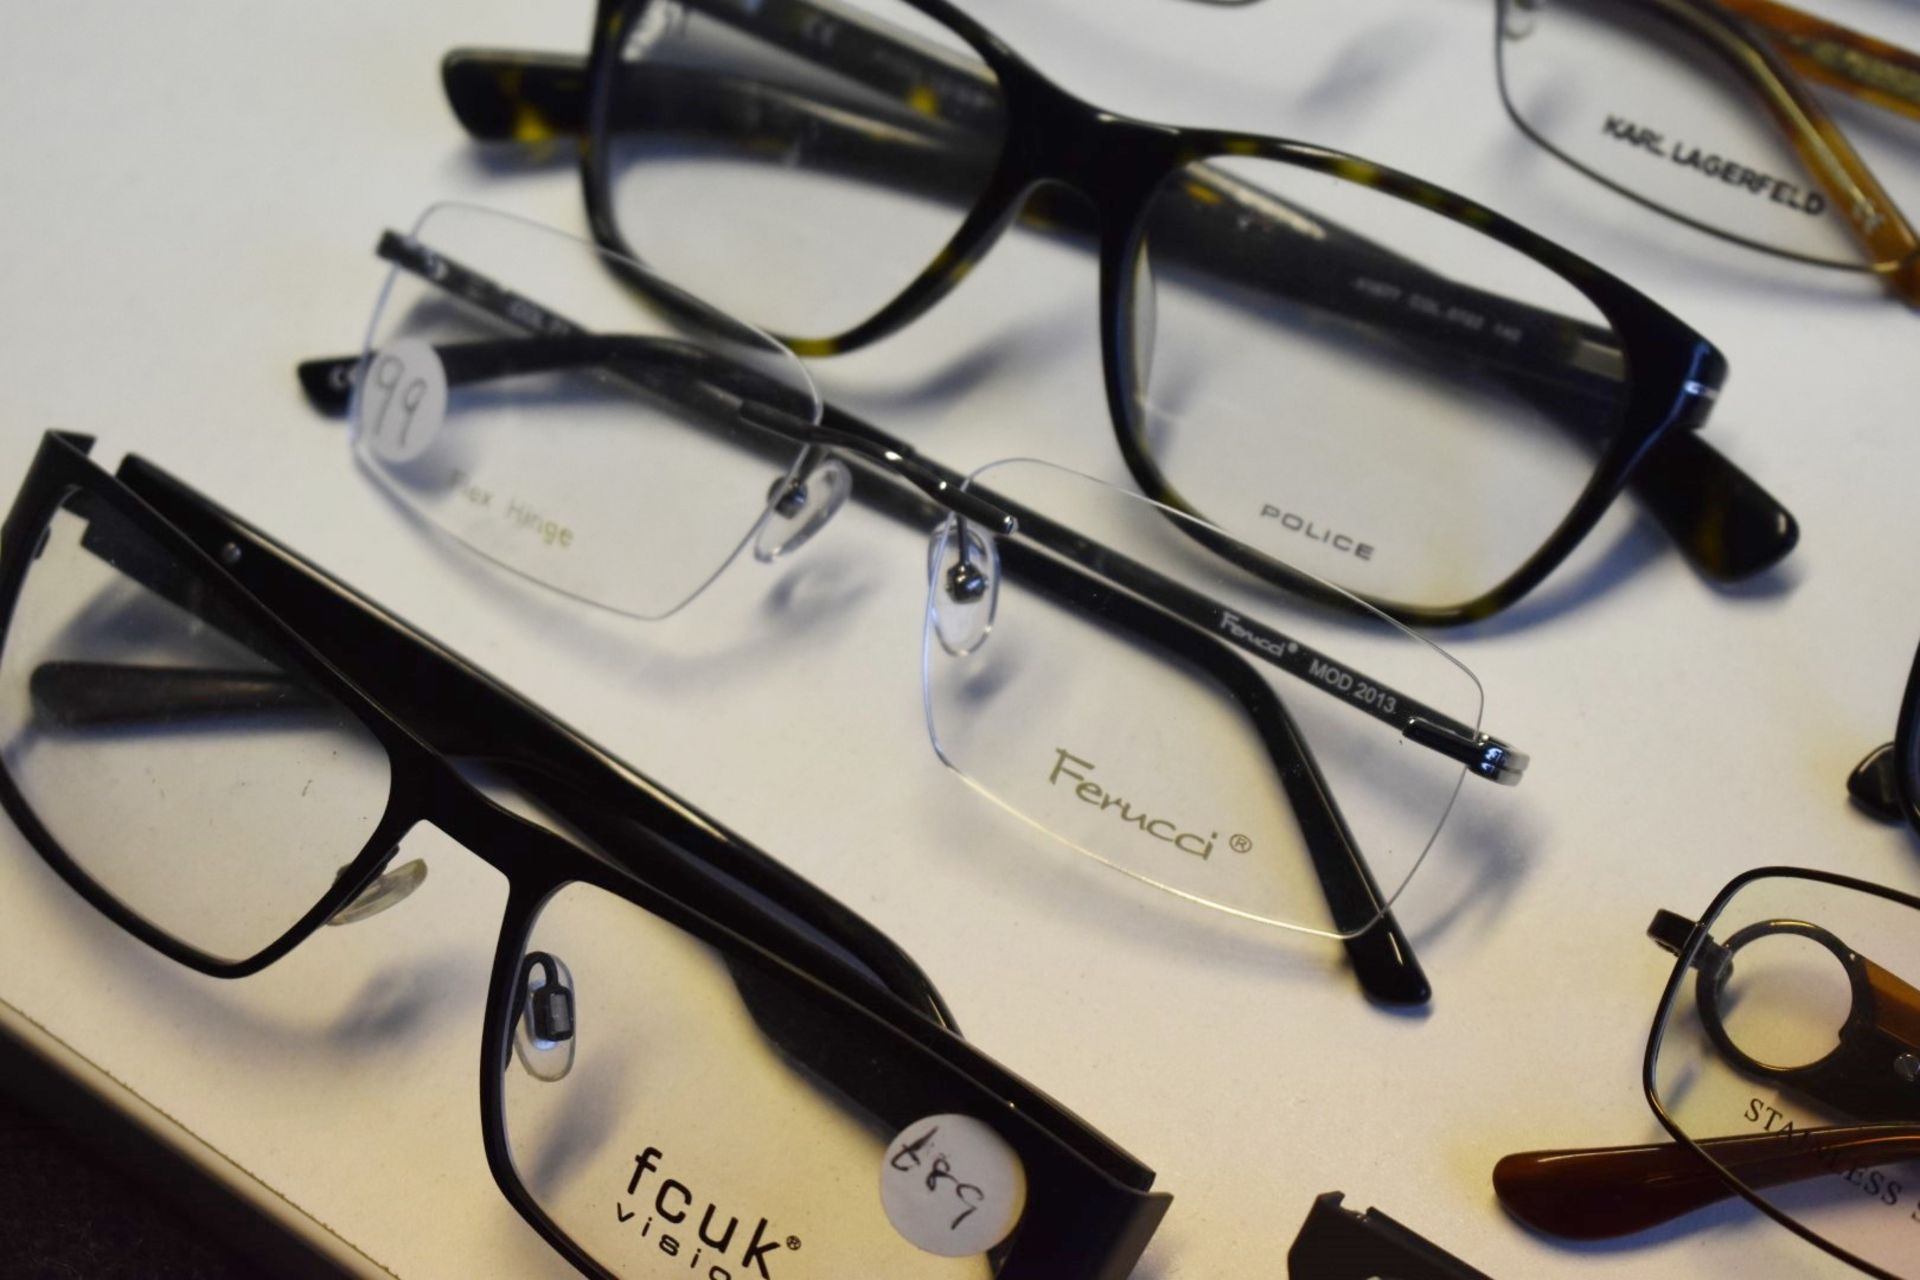 10 x Assorted Pairs of Designer Spectacle Eye Glasses - Ex Display Stock - Brands Include Diesel, - Image 9 of 10